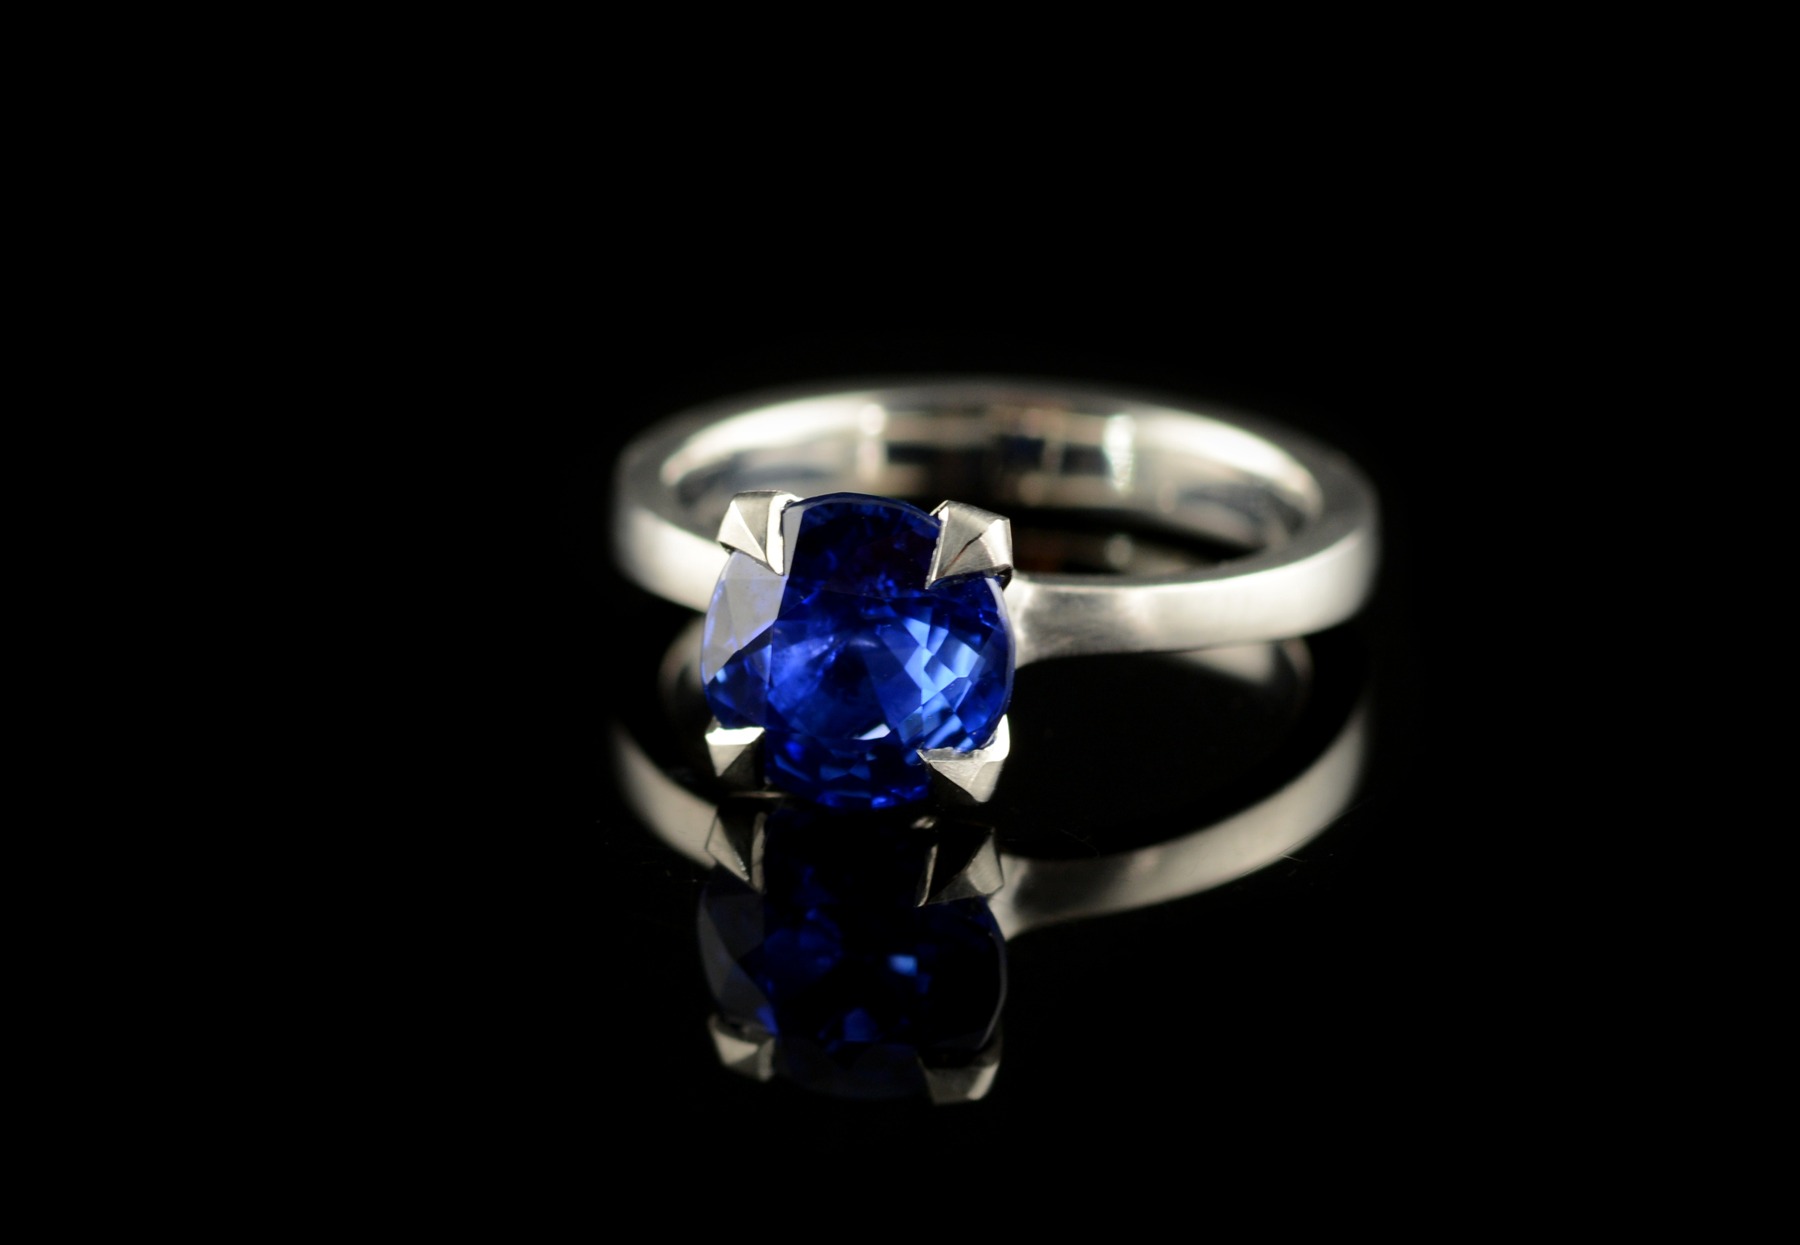 Platinum and sapphire ring with 4 pointed claws